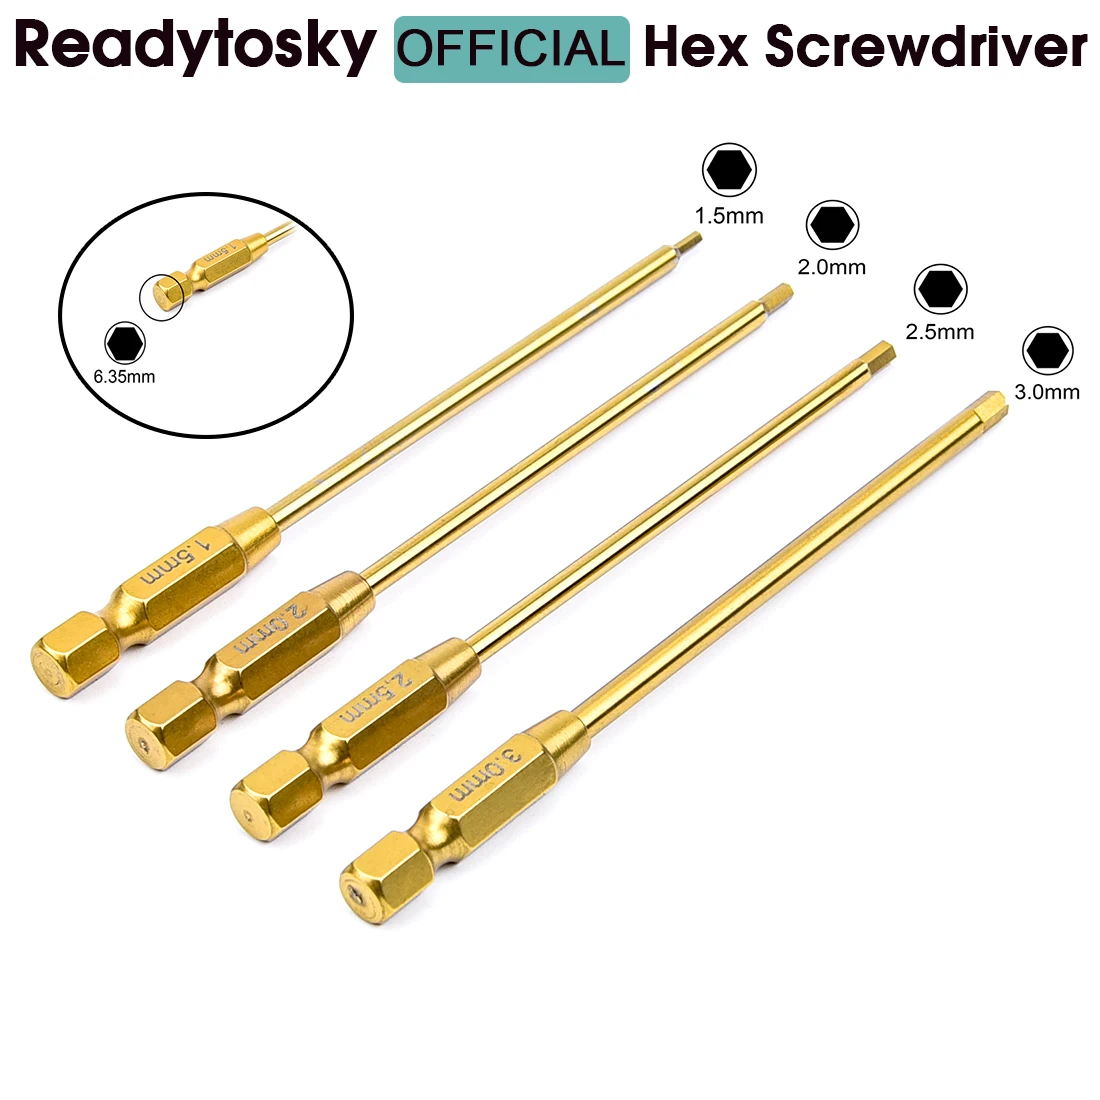 4PCs 1.5mm 2.0mm 2.5mm 3.0mm Hex Screw Driver Set Hexagon Screwdriver Wrench Tool Kit for Multi-Axis FPV Drone